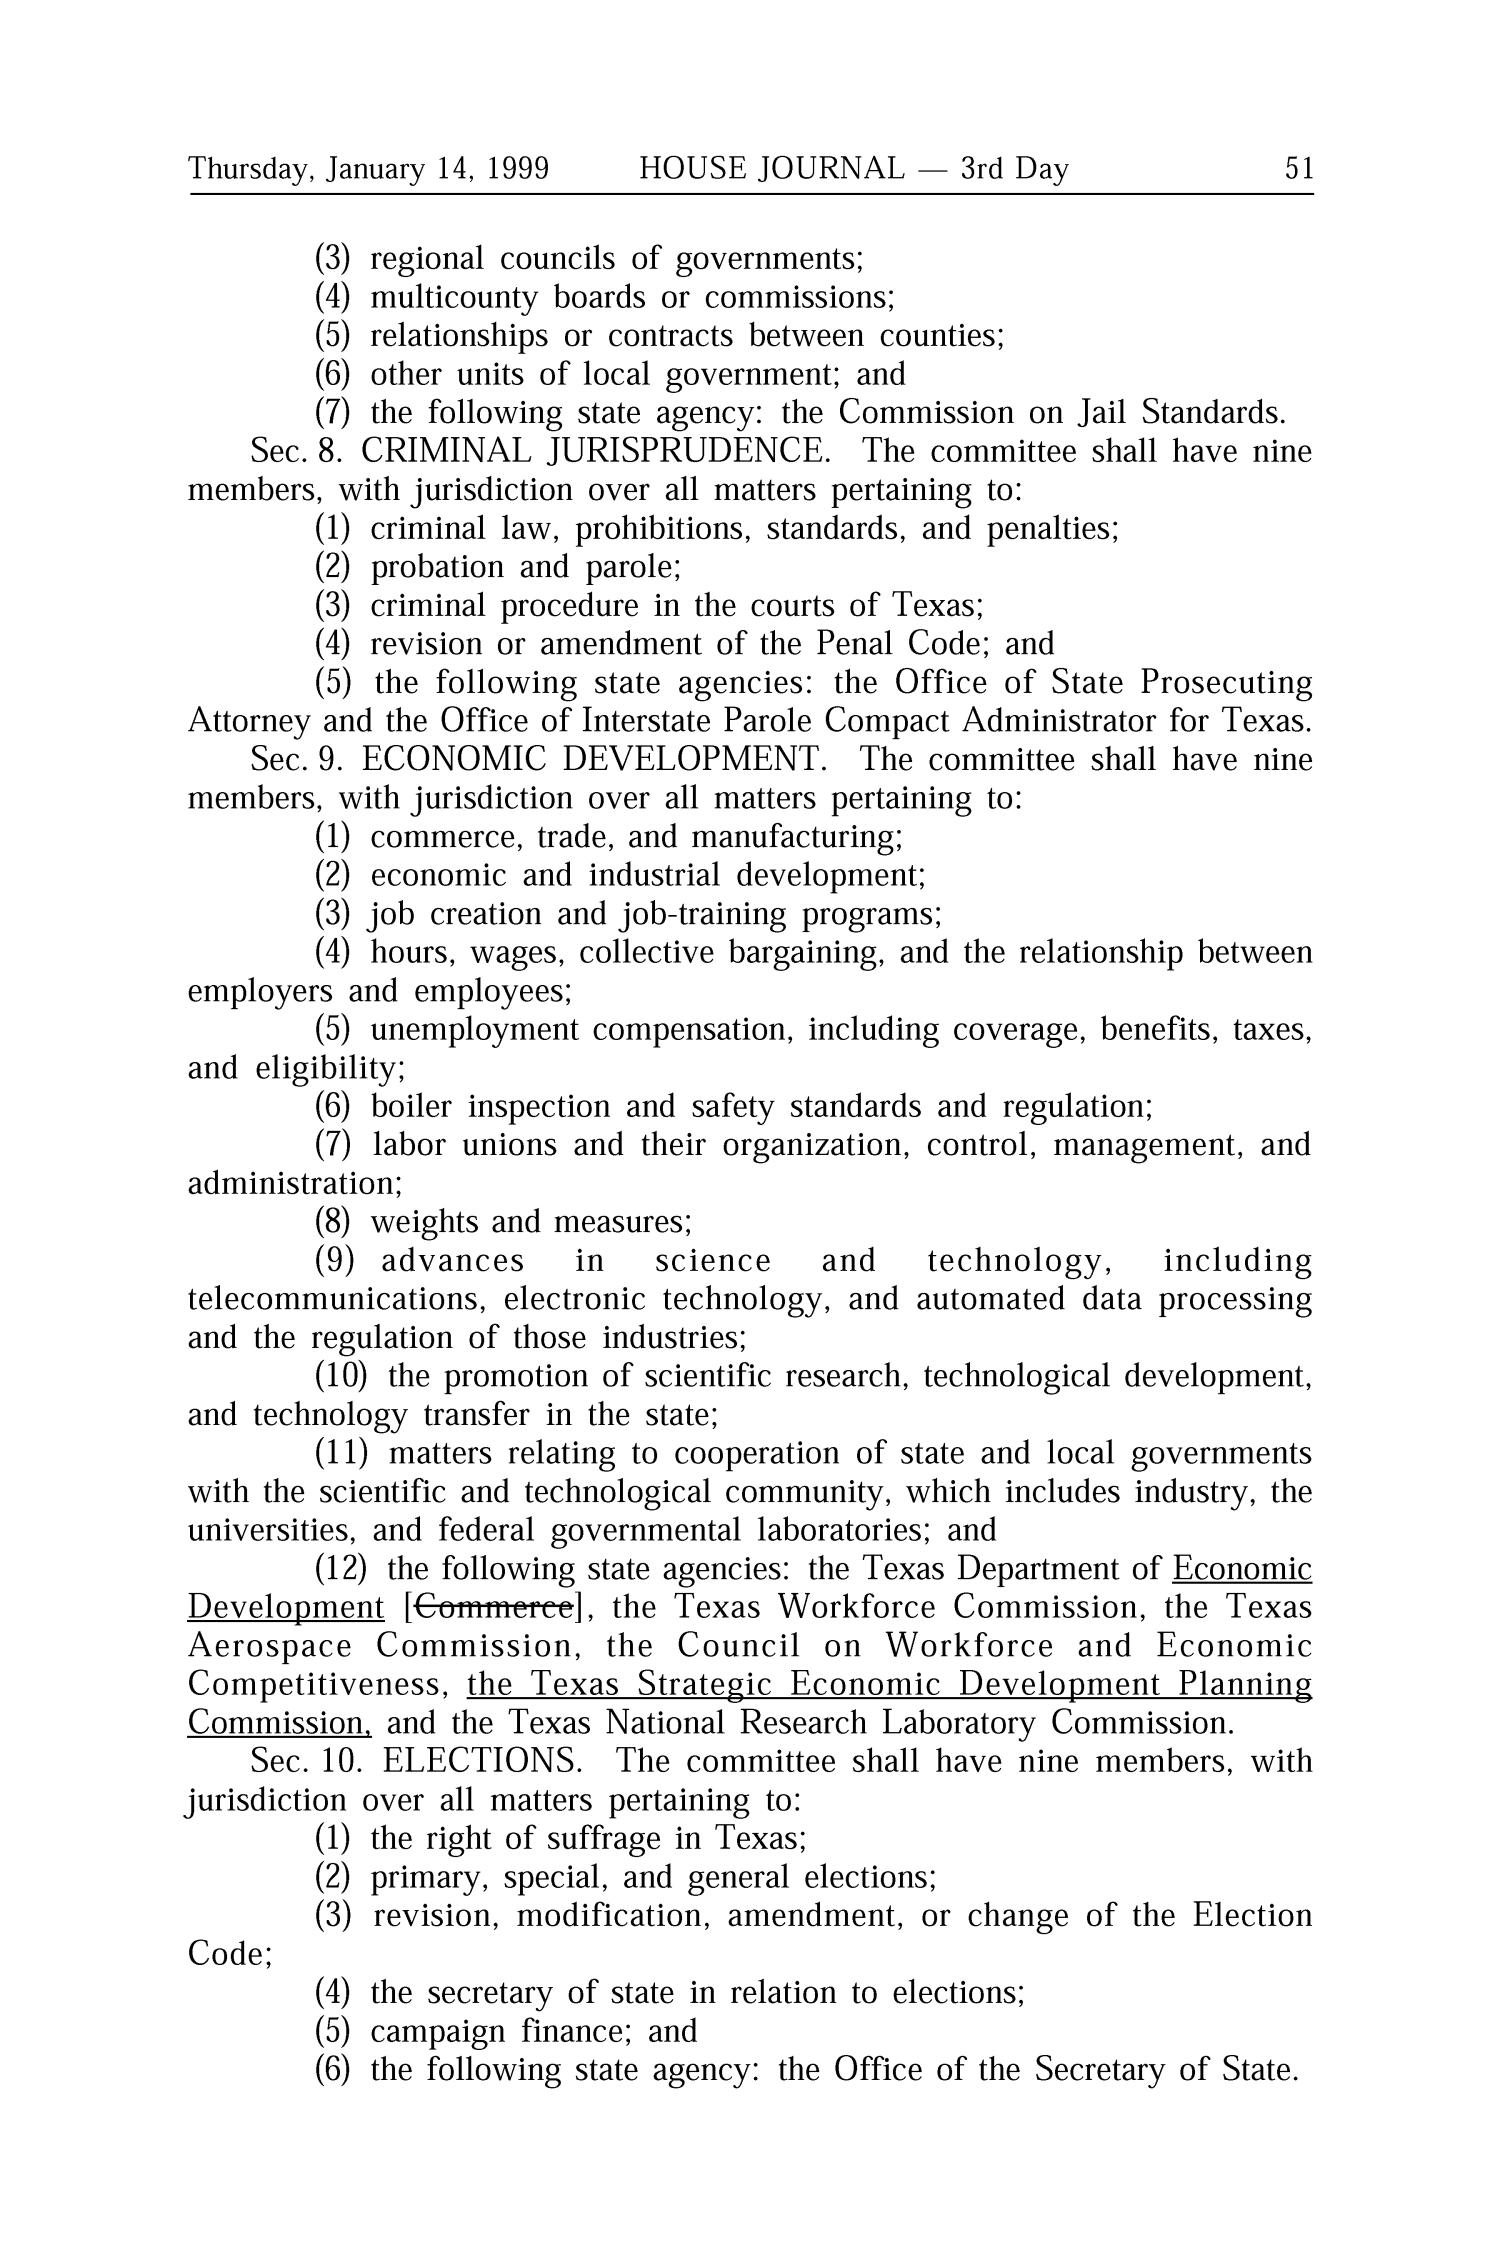 Journal of the House of Representatives of the Regular Session of the Seventy-Sixth Legislature of the State of Texas, Volume 1
                                                
                                                    51
                                                